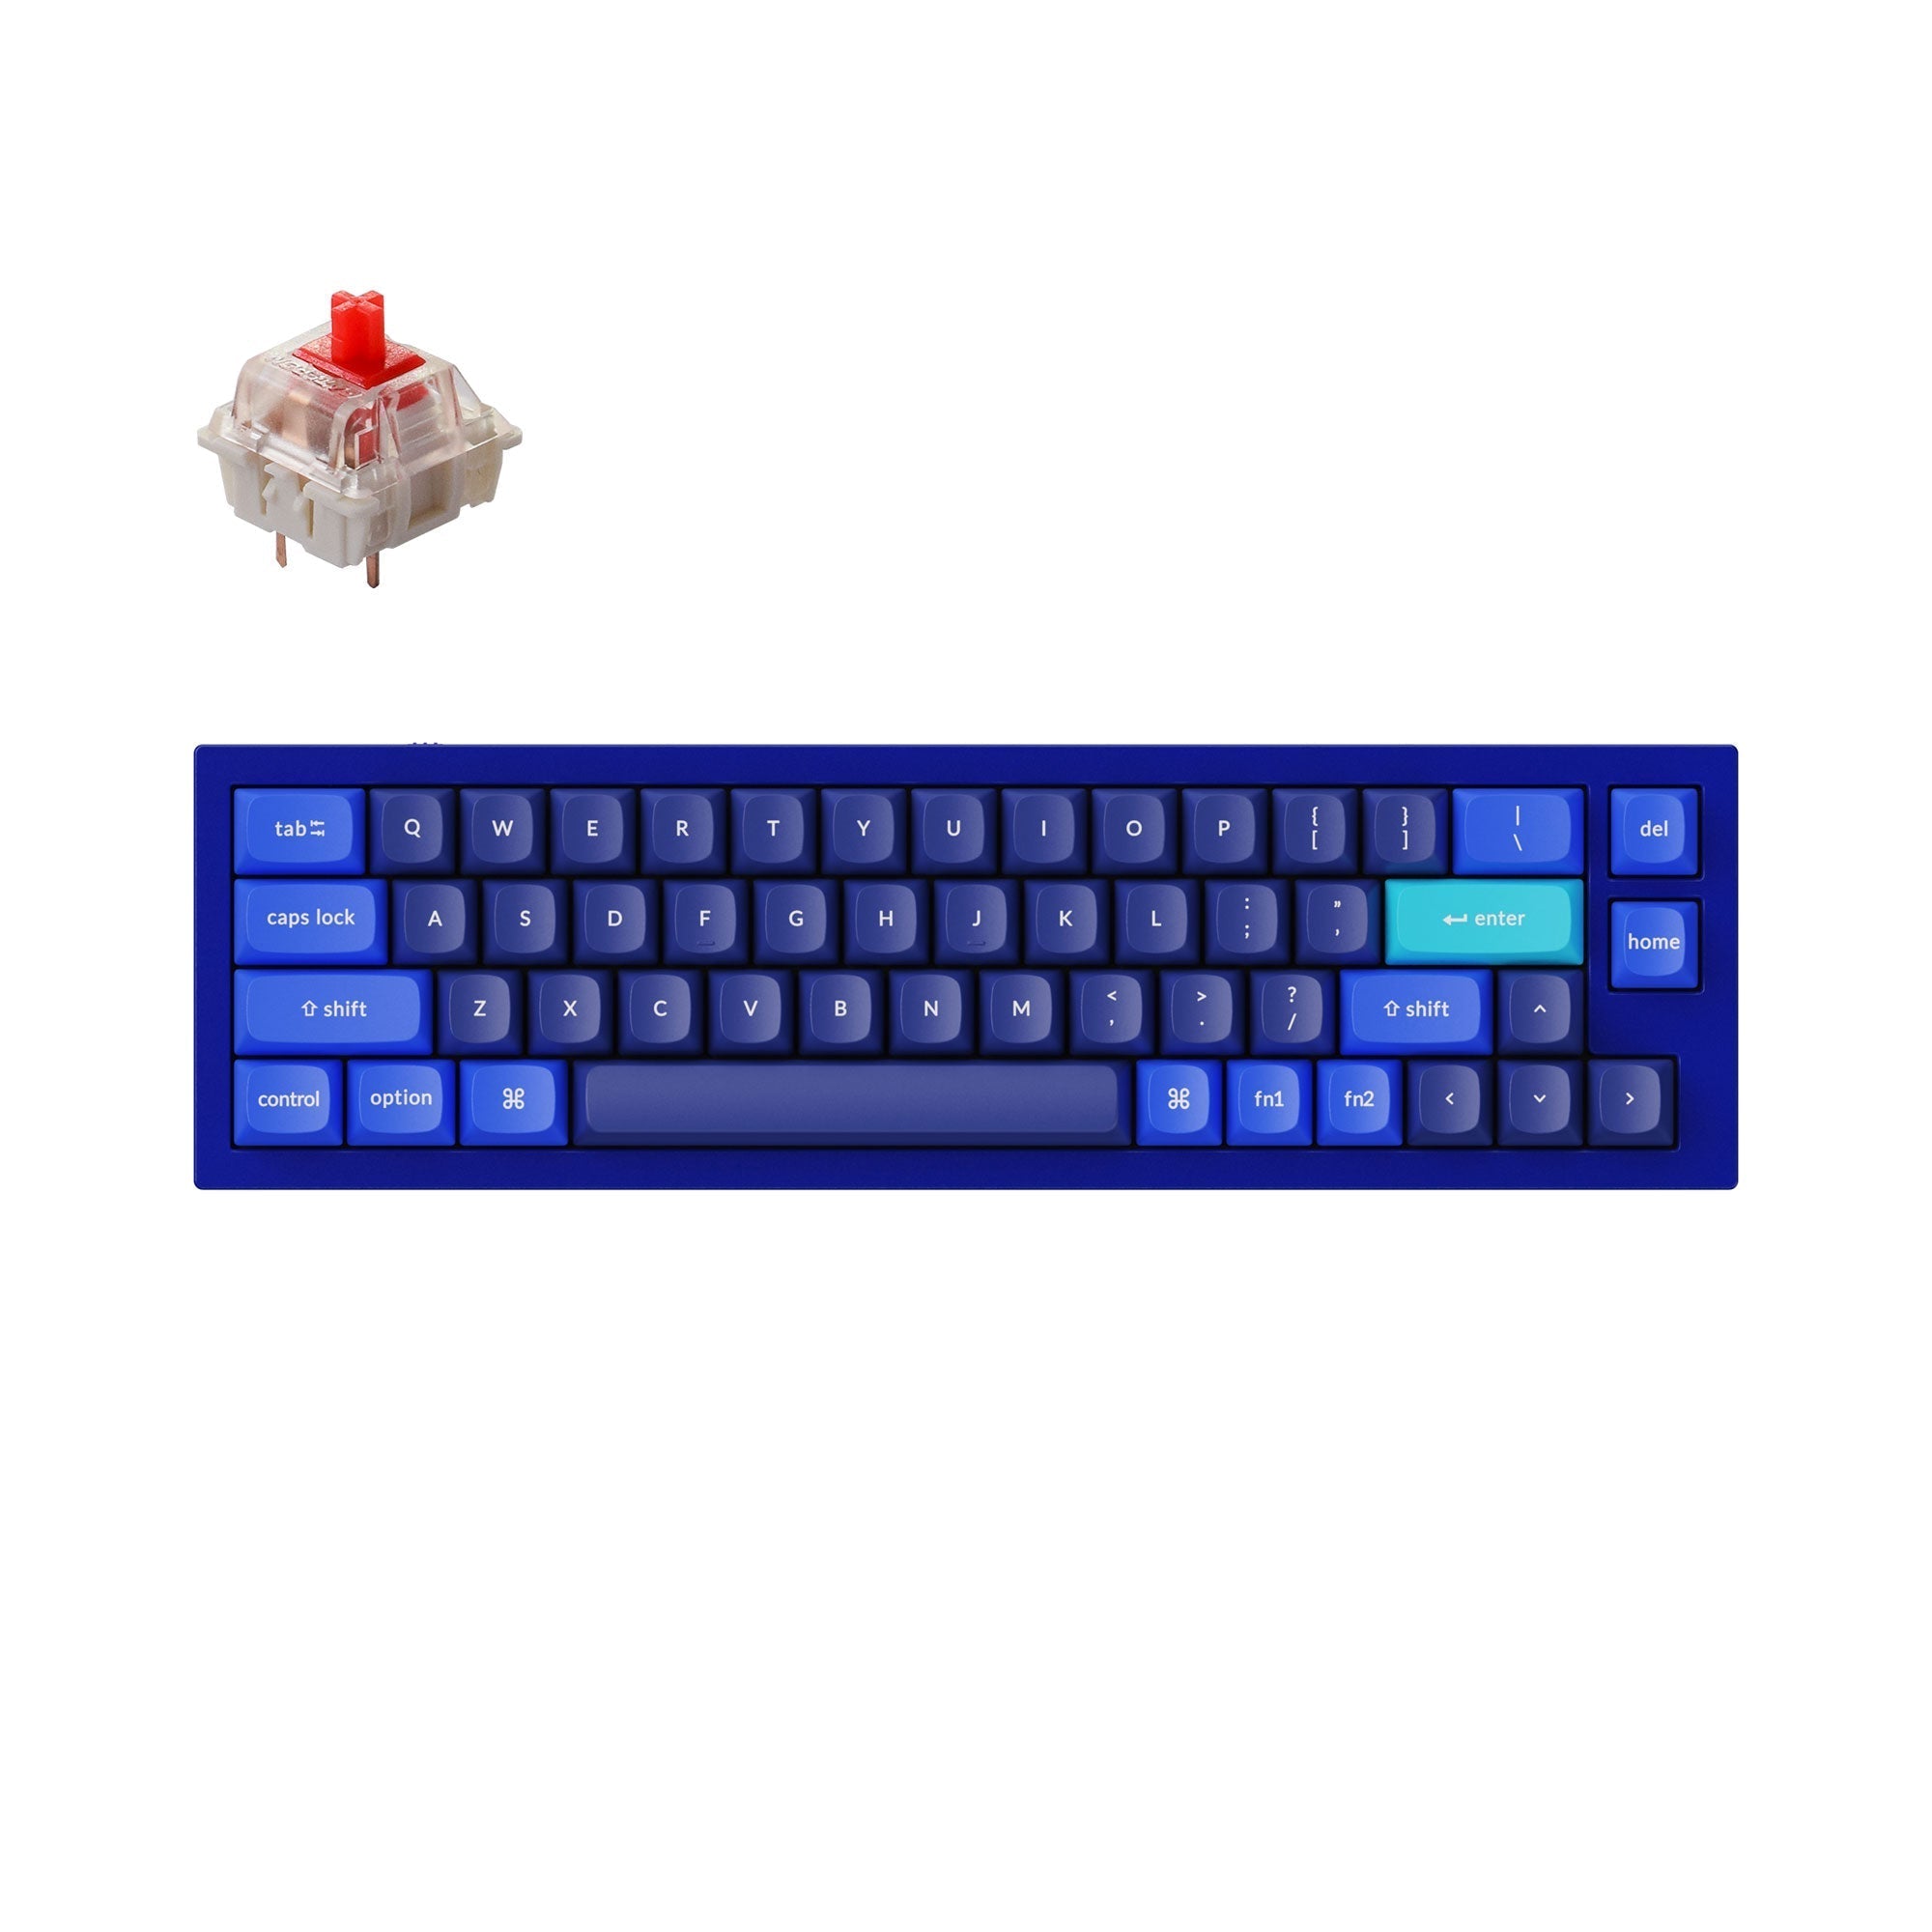 Keychron Q9 QMK/VIA custom mechanical keyboard 40 percent layout full aluminum body for Mac Windows Linux fully assembled blue frame with Gateron G Pro switch red